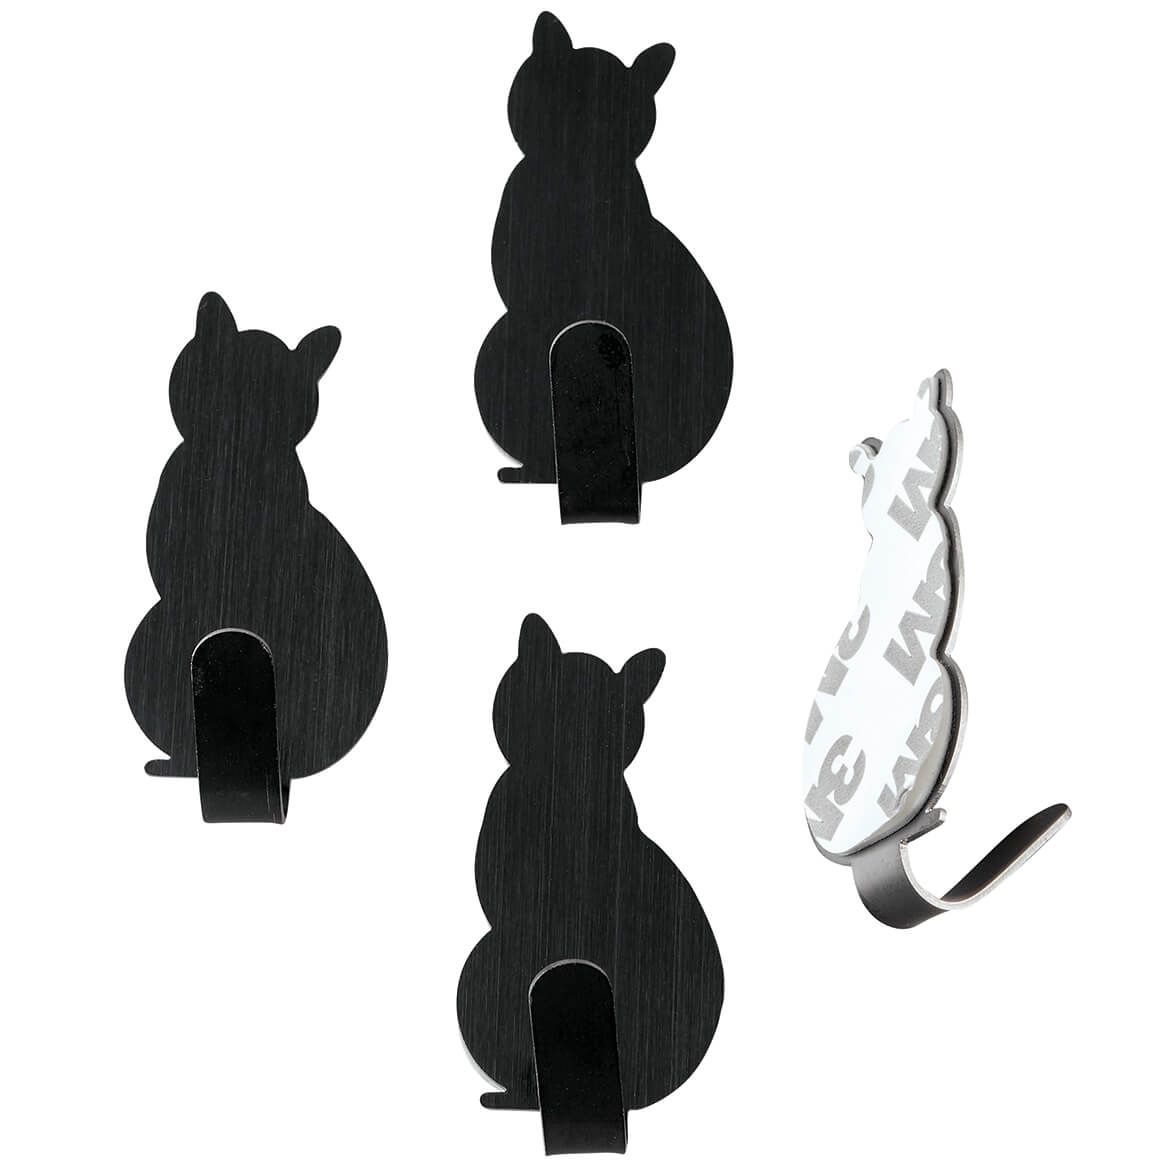 Stainless Steel Adhesive Sitting Cat Hooks, Set of 4 + '-' + 373004